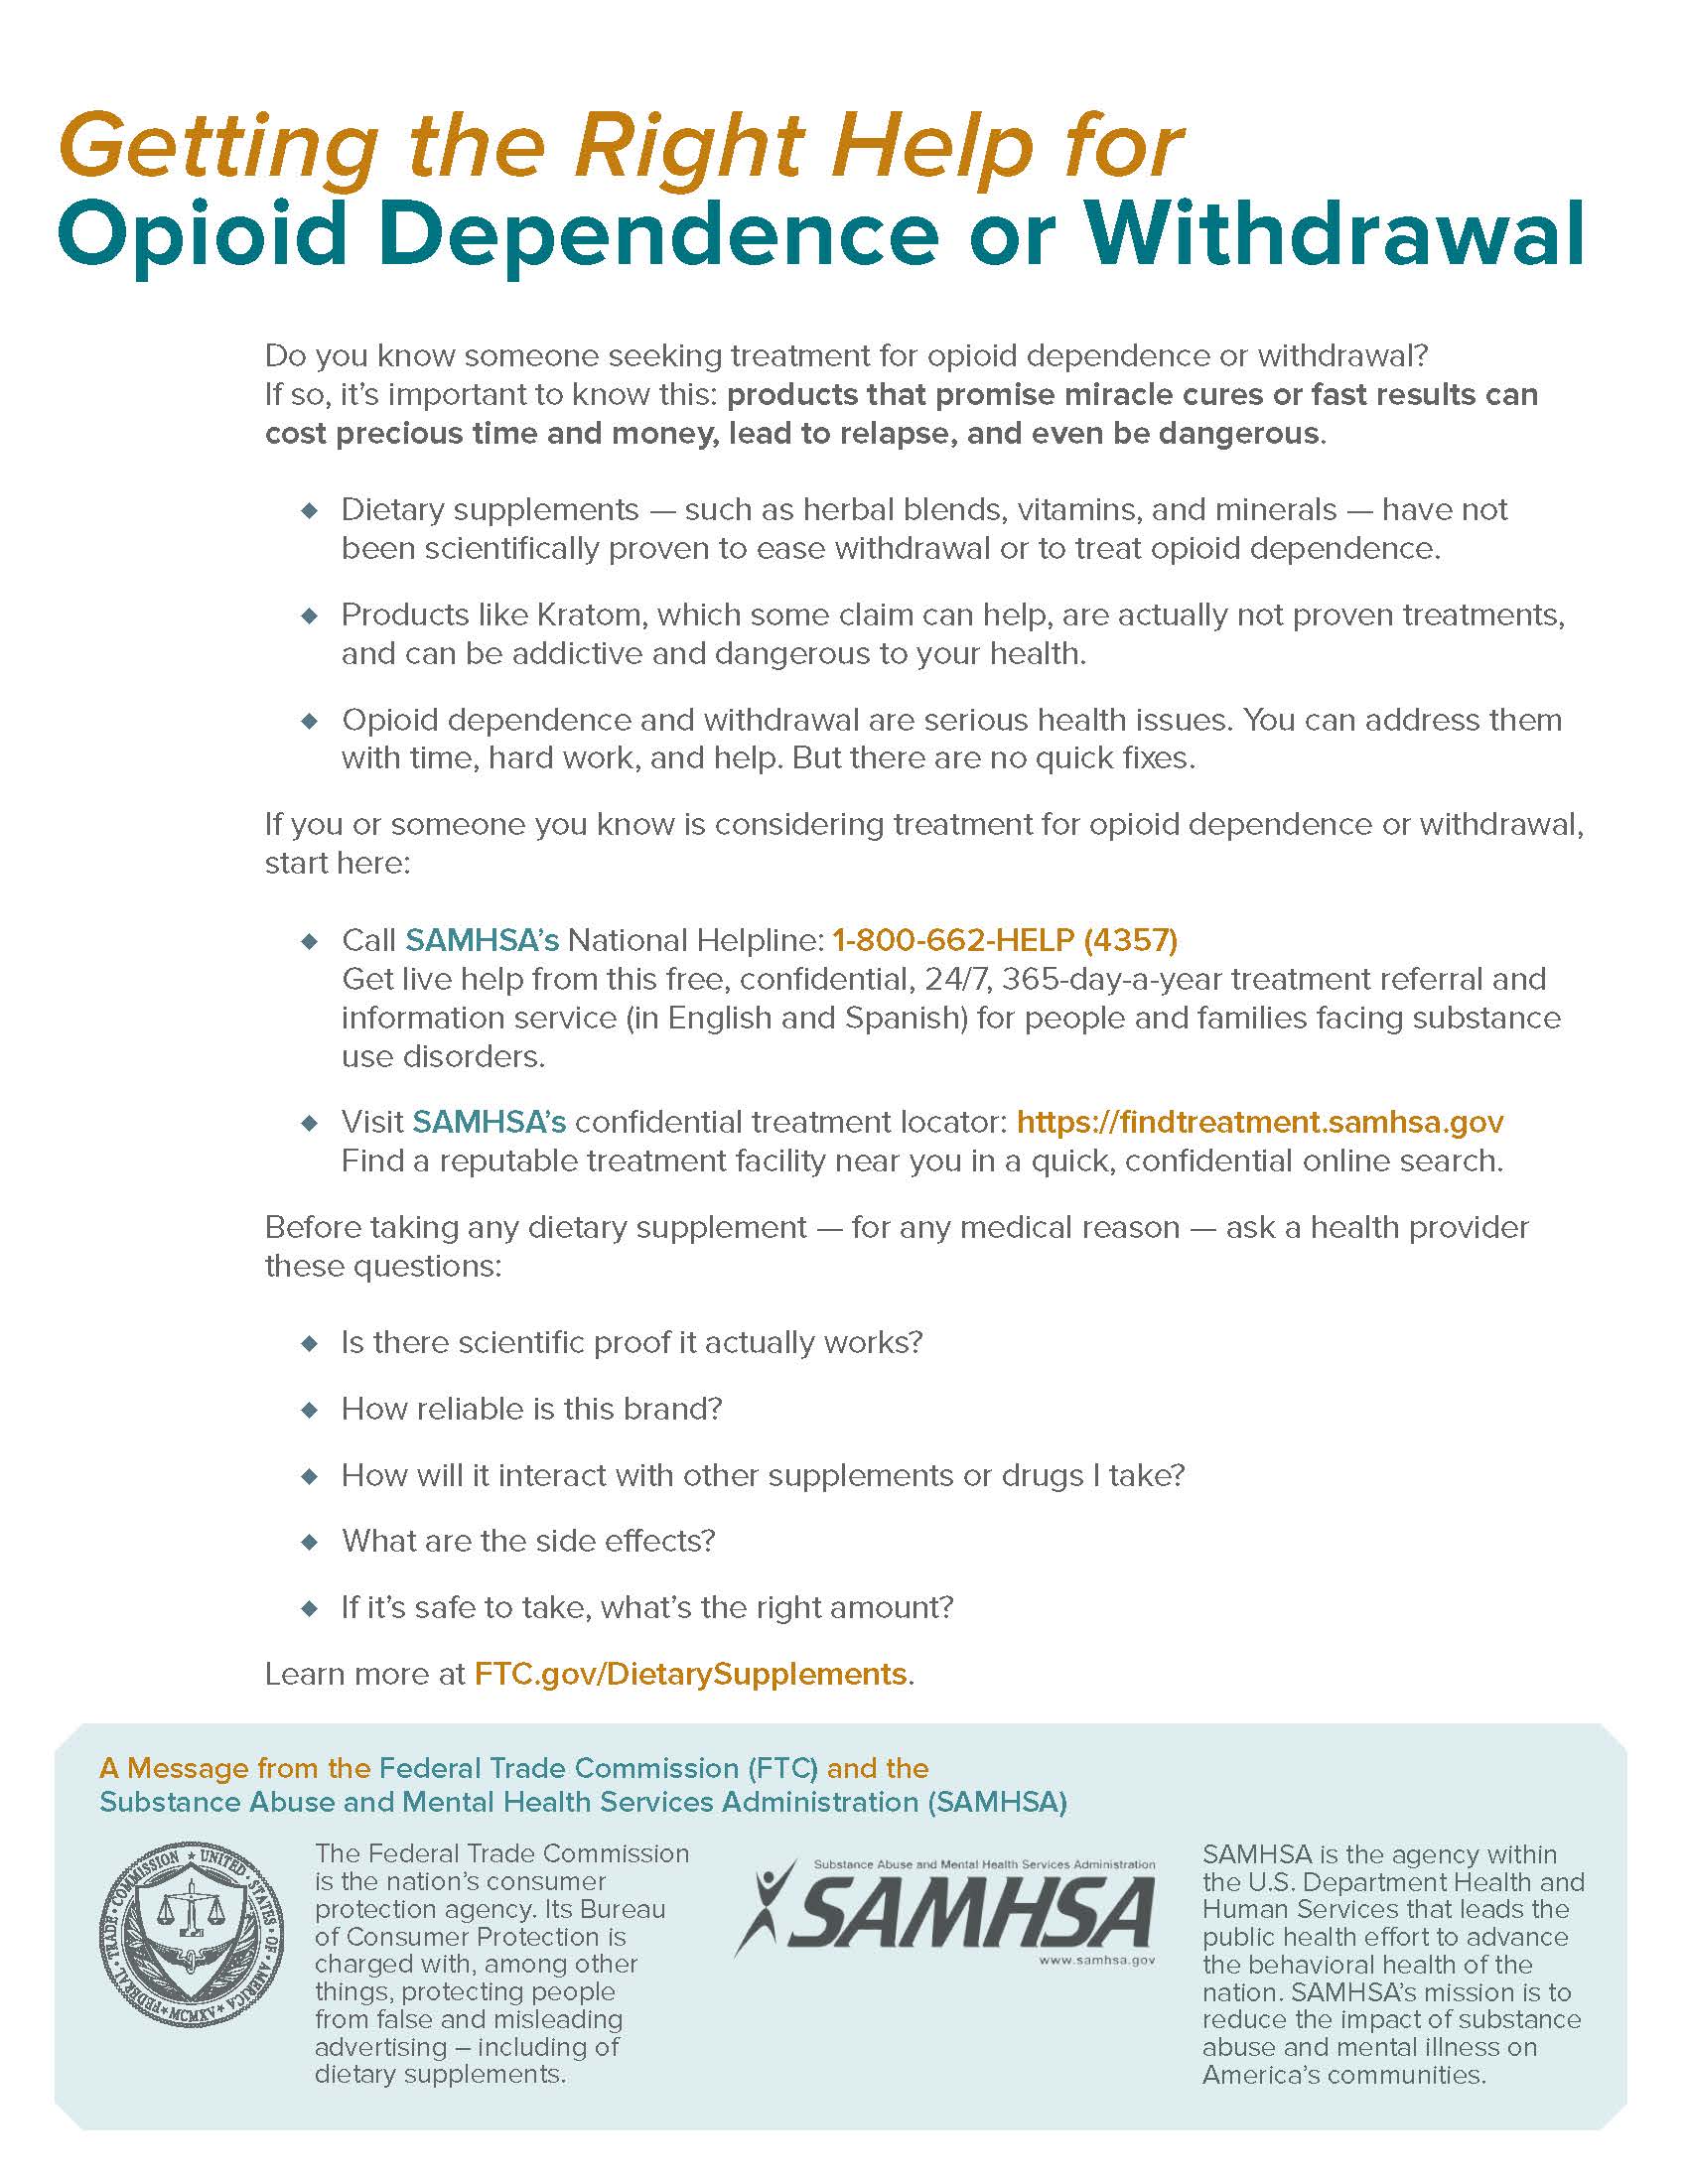 Getting the Right Help for Opioid Dependence or Withdrawal